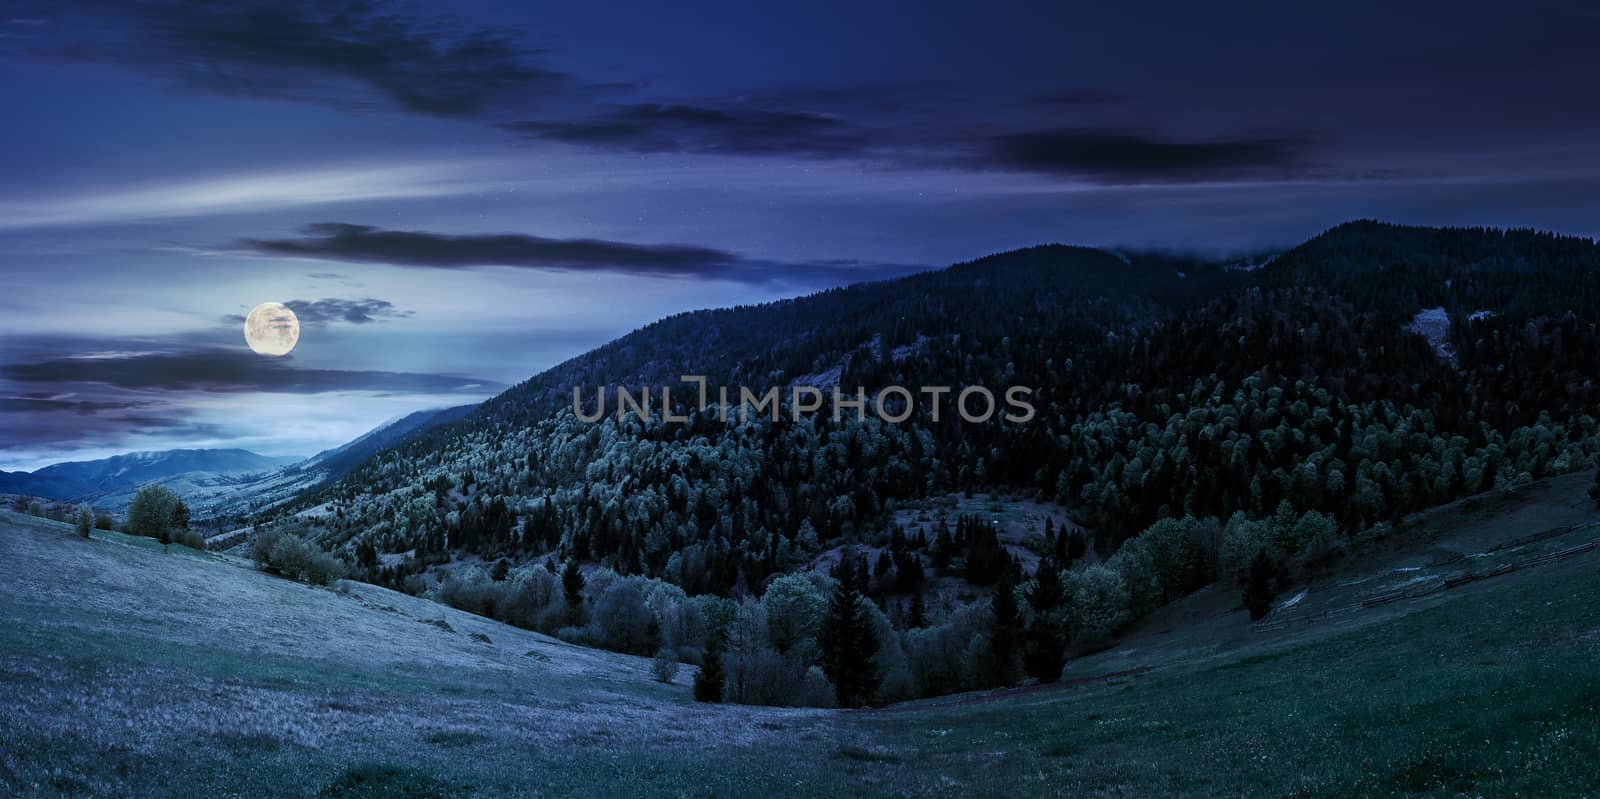 meadow with trees in mountains at night by Pellinni